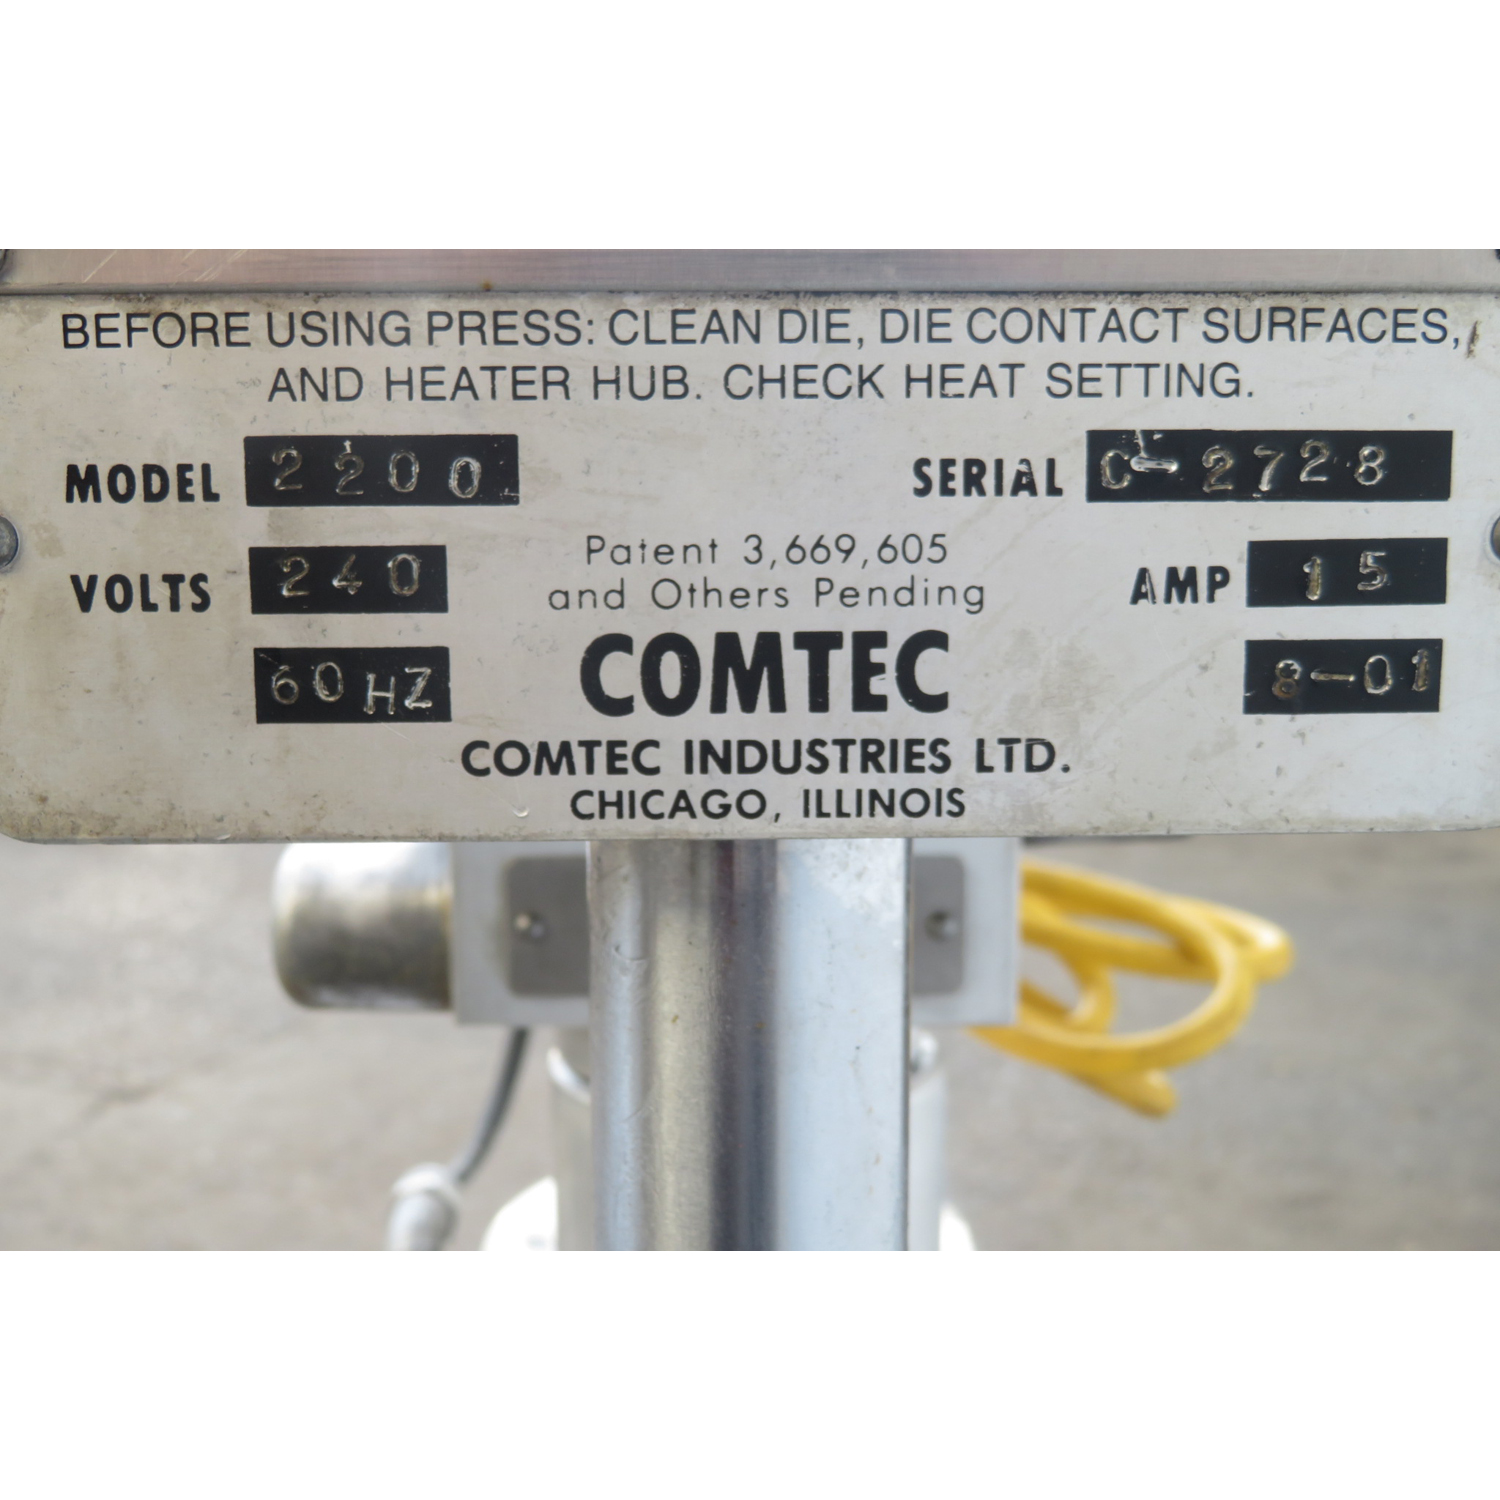 Comtec 2200 Pie and Pastry Crust Forming Press, Used Great Condition image 5